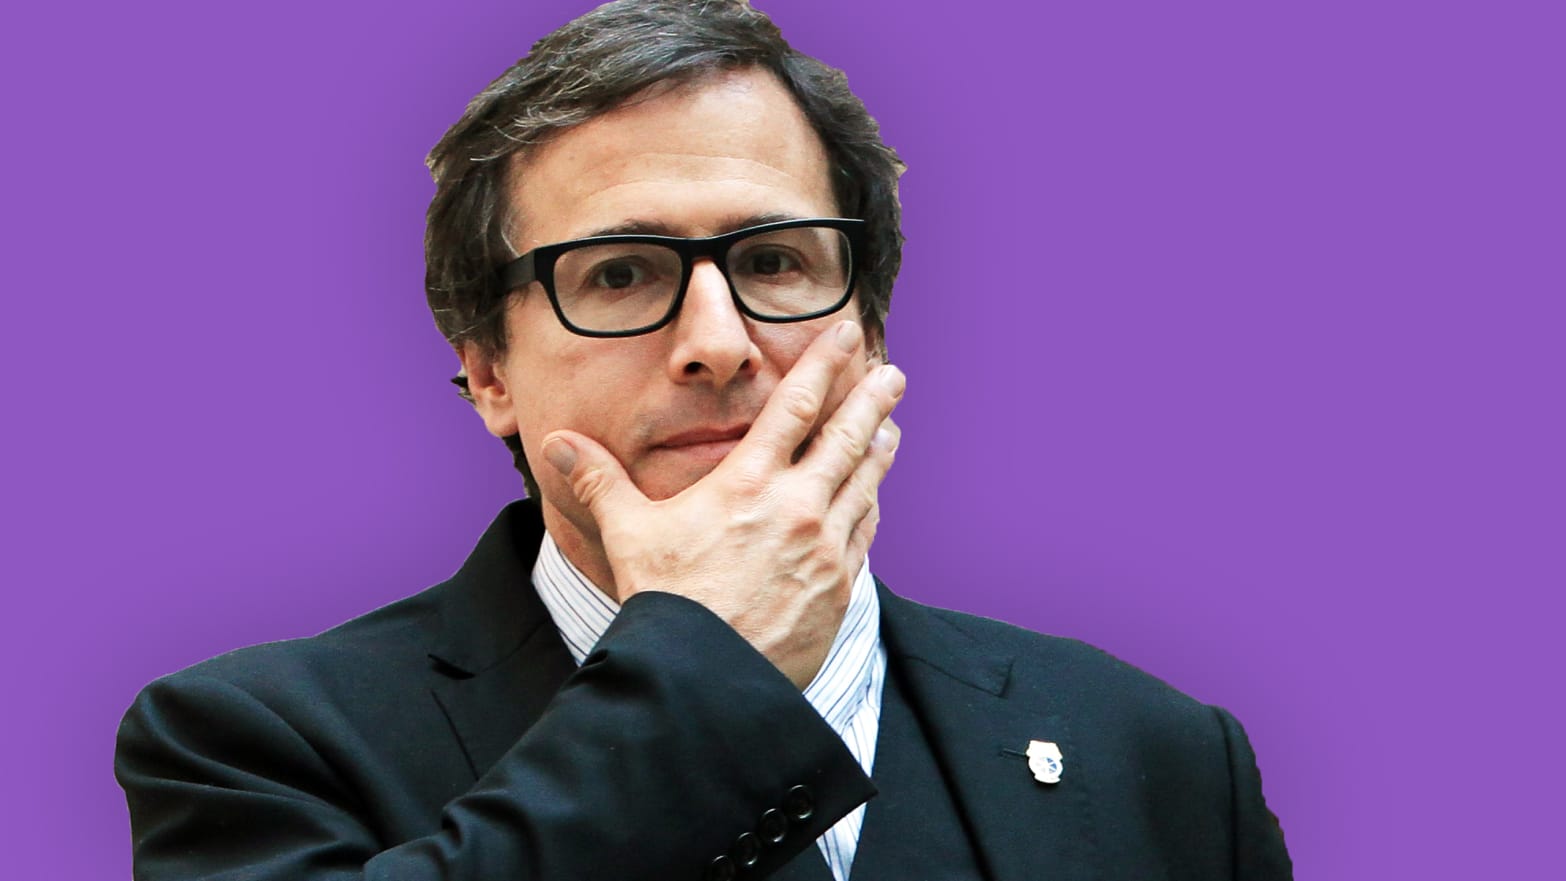 Hollywood Terror: Director David O. Russell’s History of Groping and On-Set Abuse